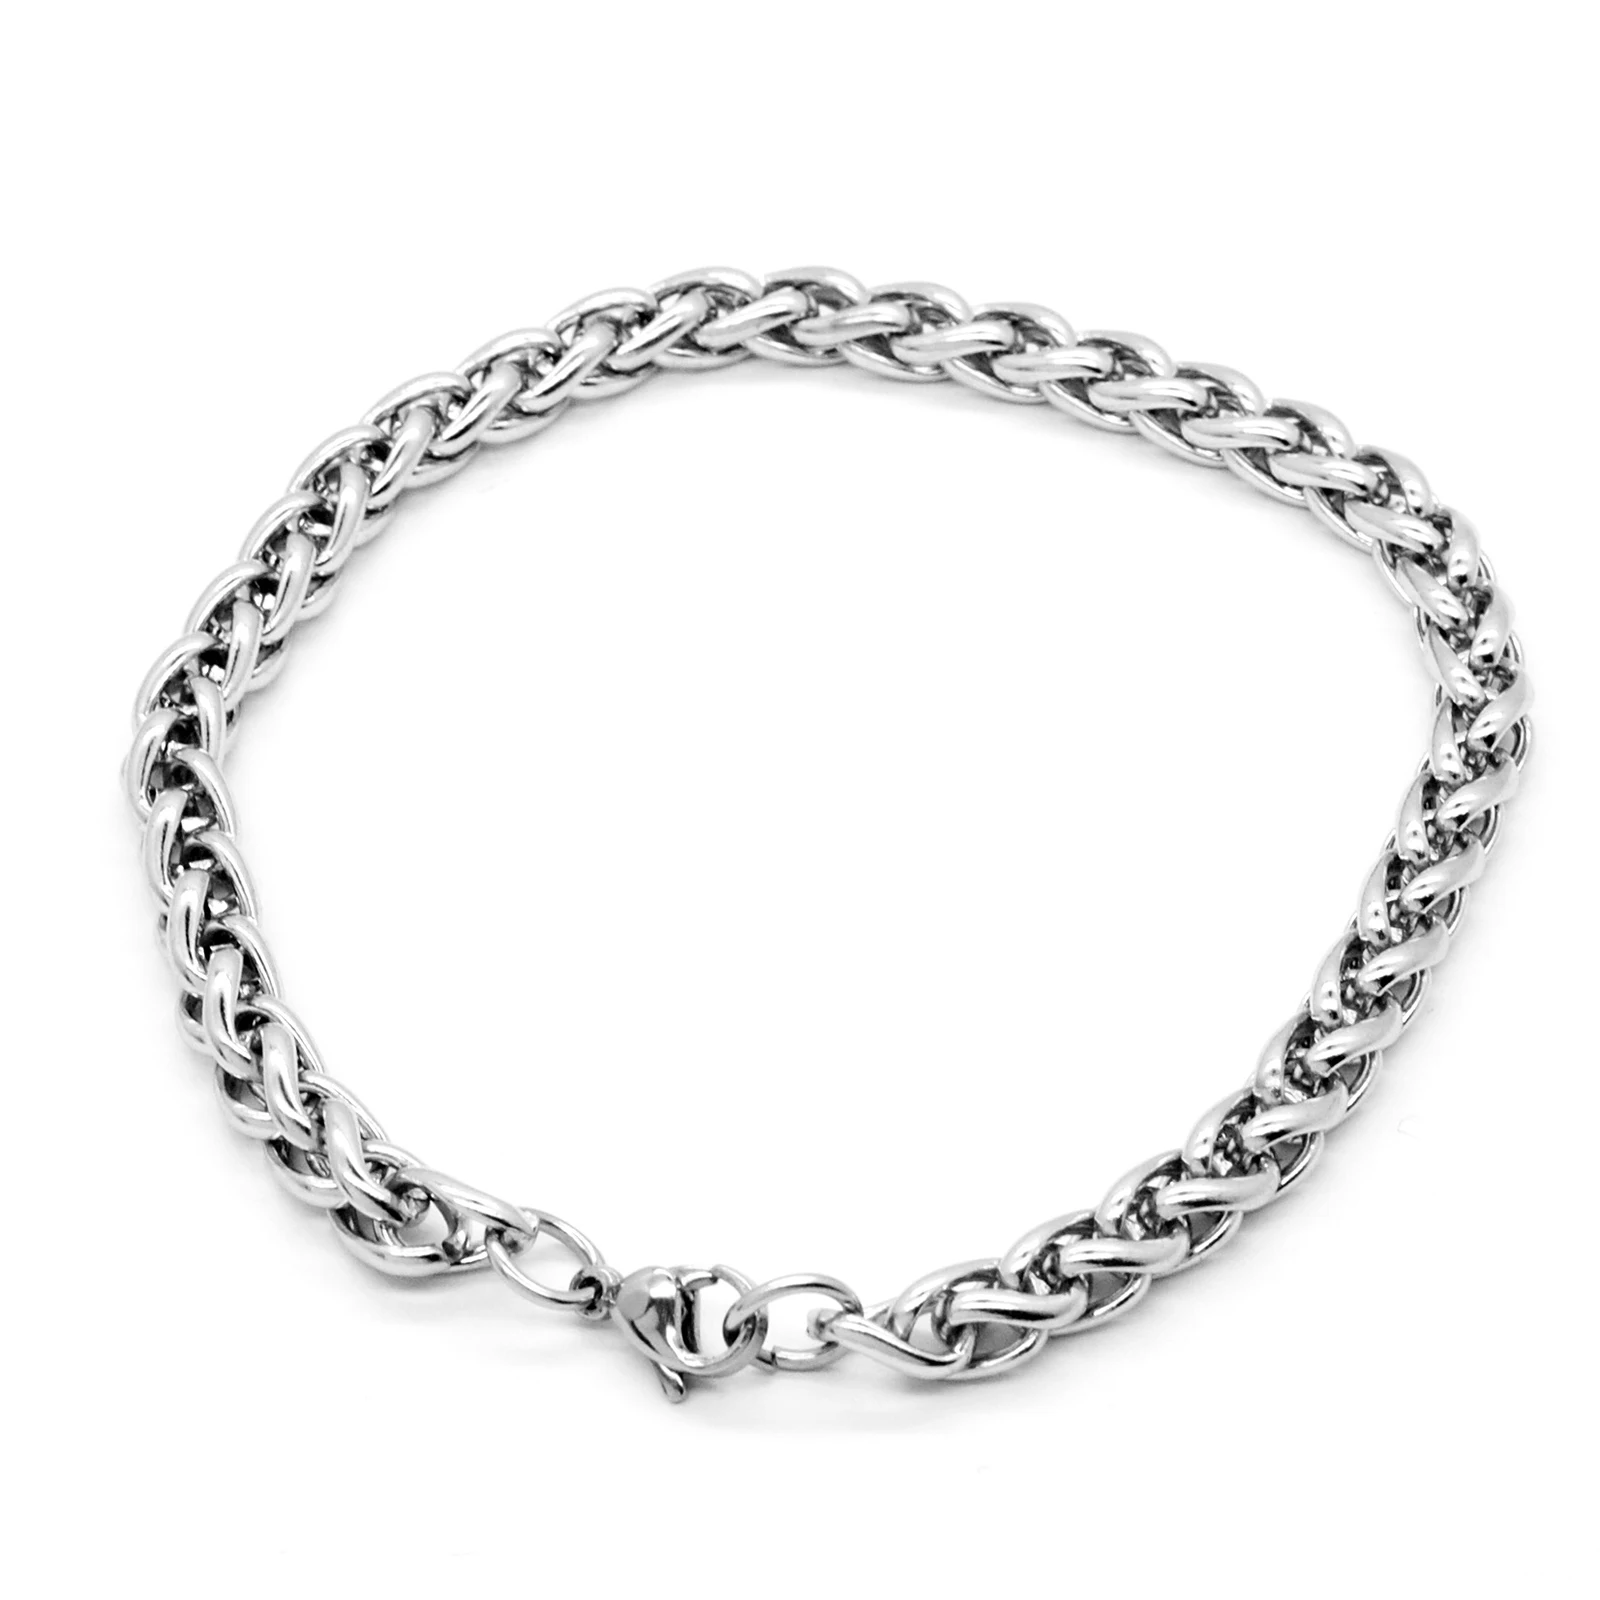 

Stainless Steel Bracelets Curb Cuban Silver Color Classic For Men Dragon Link Chain Bracelets Anklet Fashion Jewelry 19-25cm,1PC